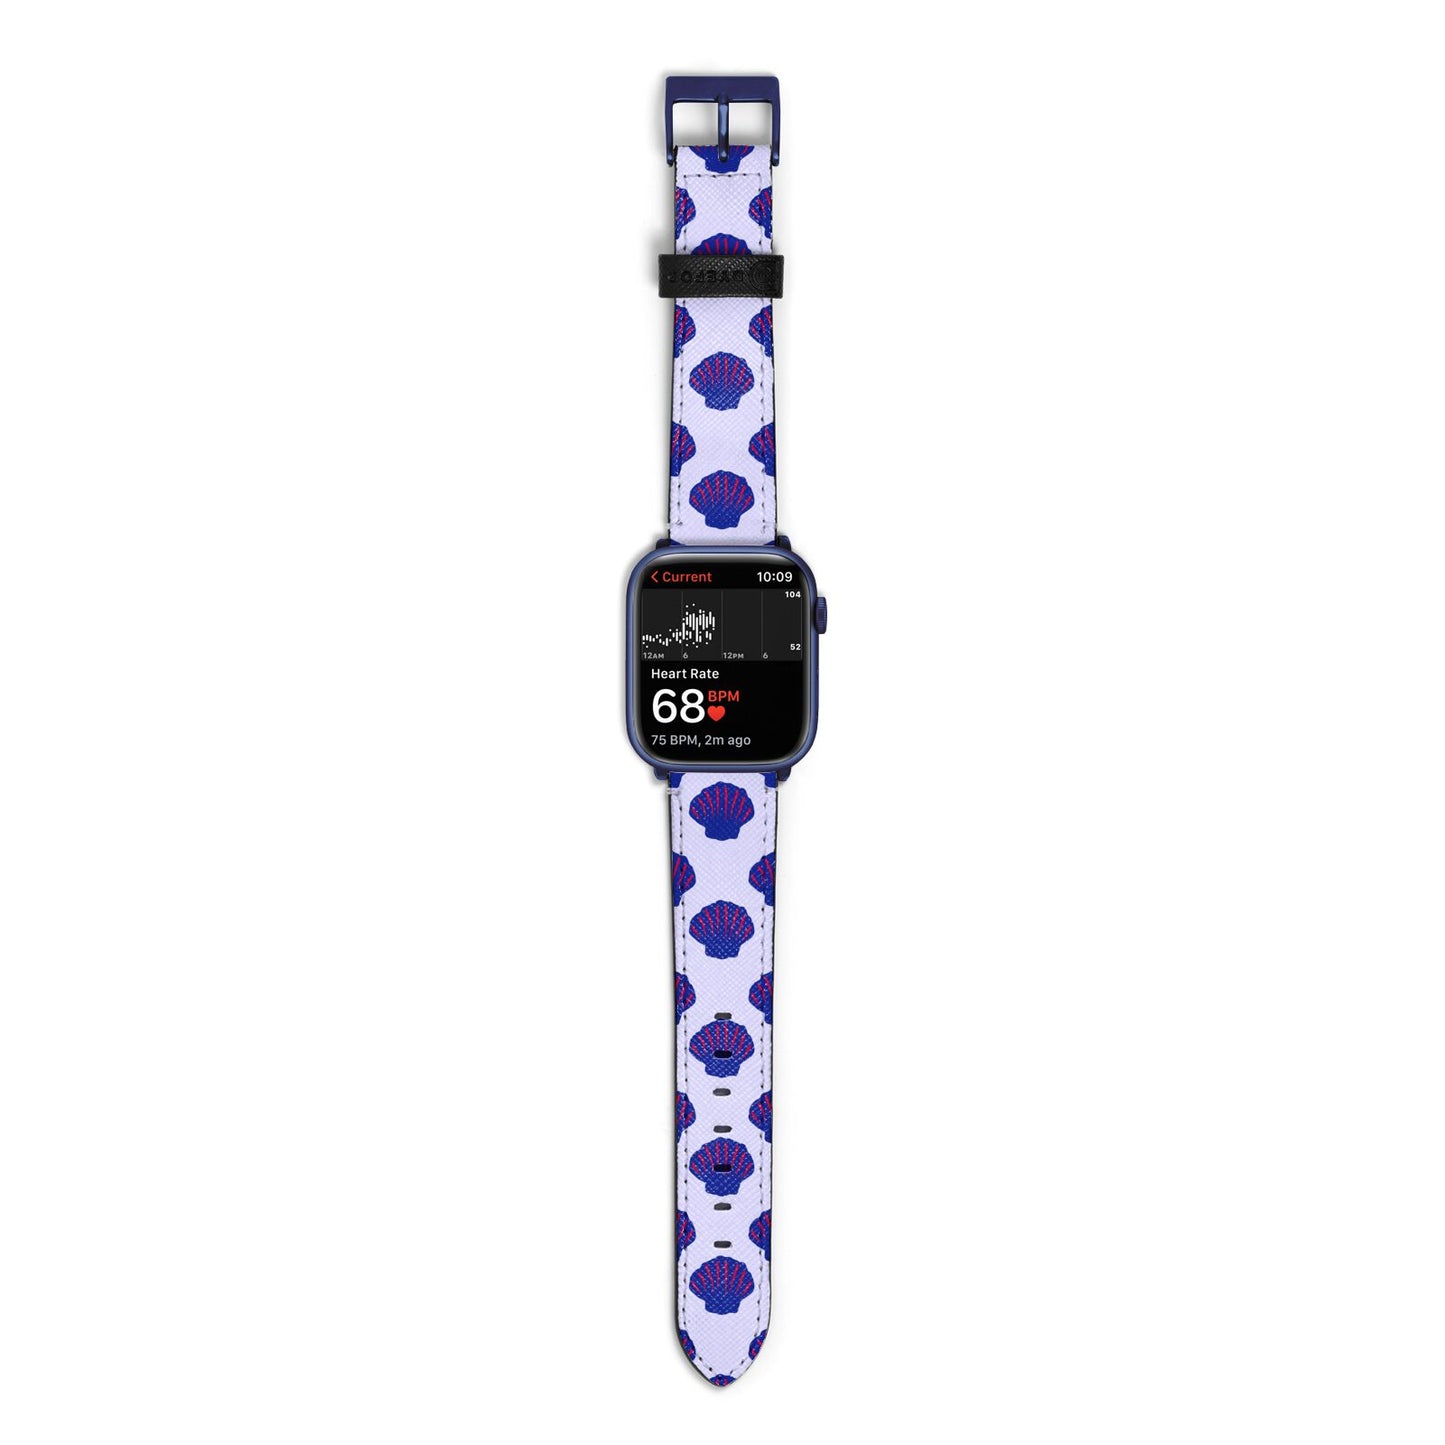 Shell Pattern Apple Watch Strap Size 38mm with Blue Hardware